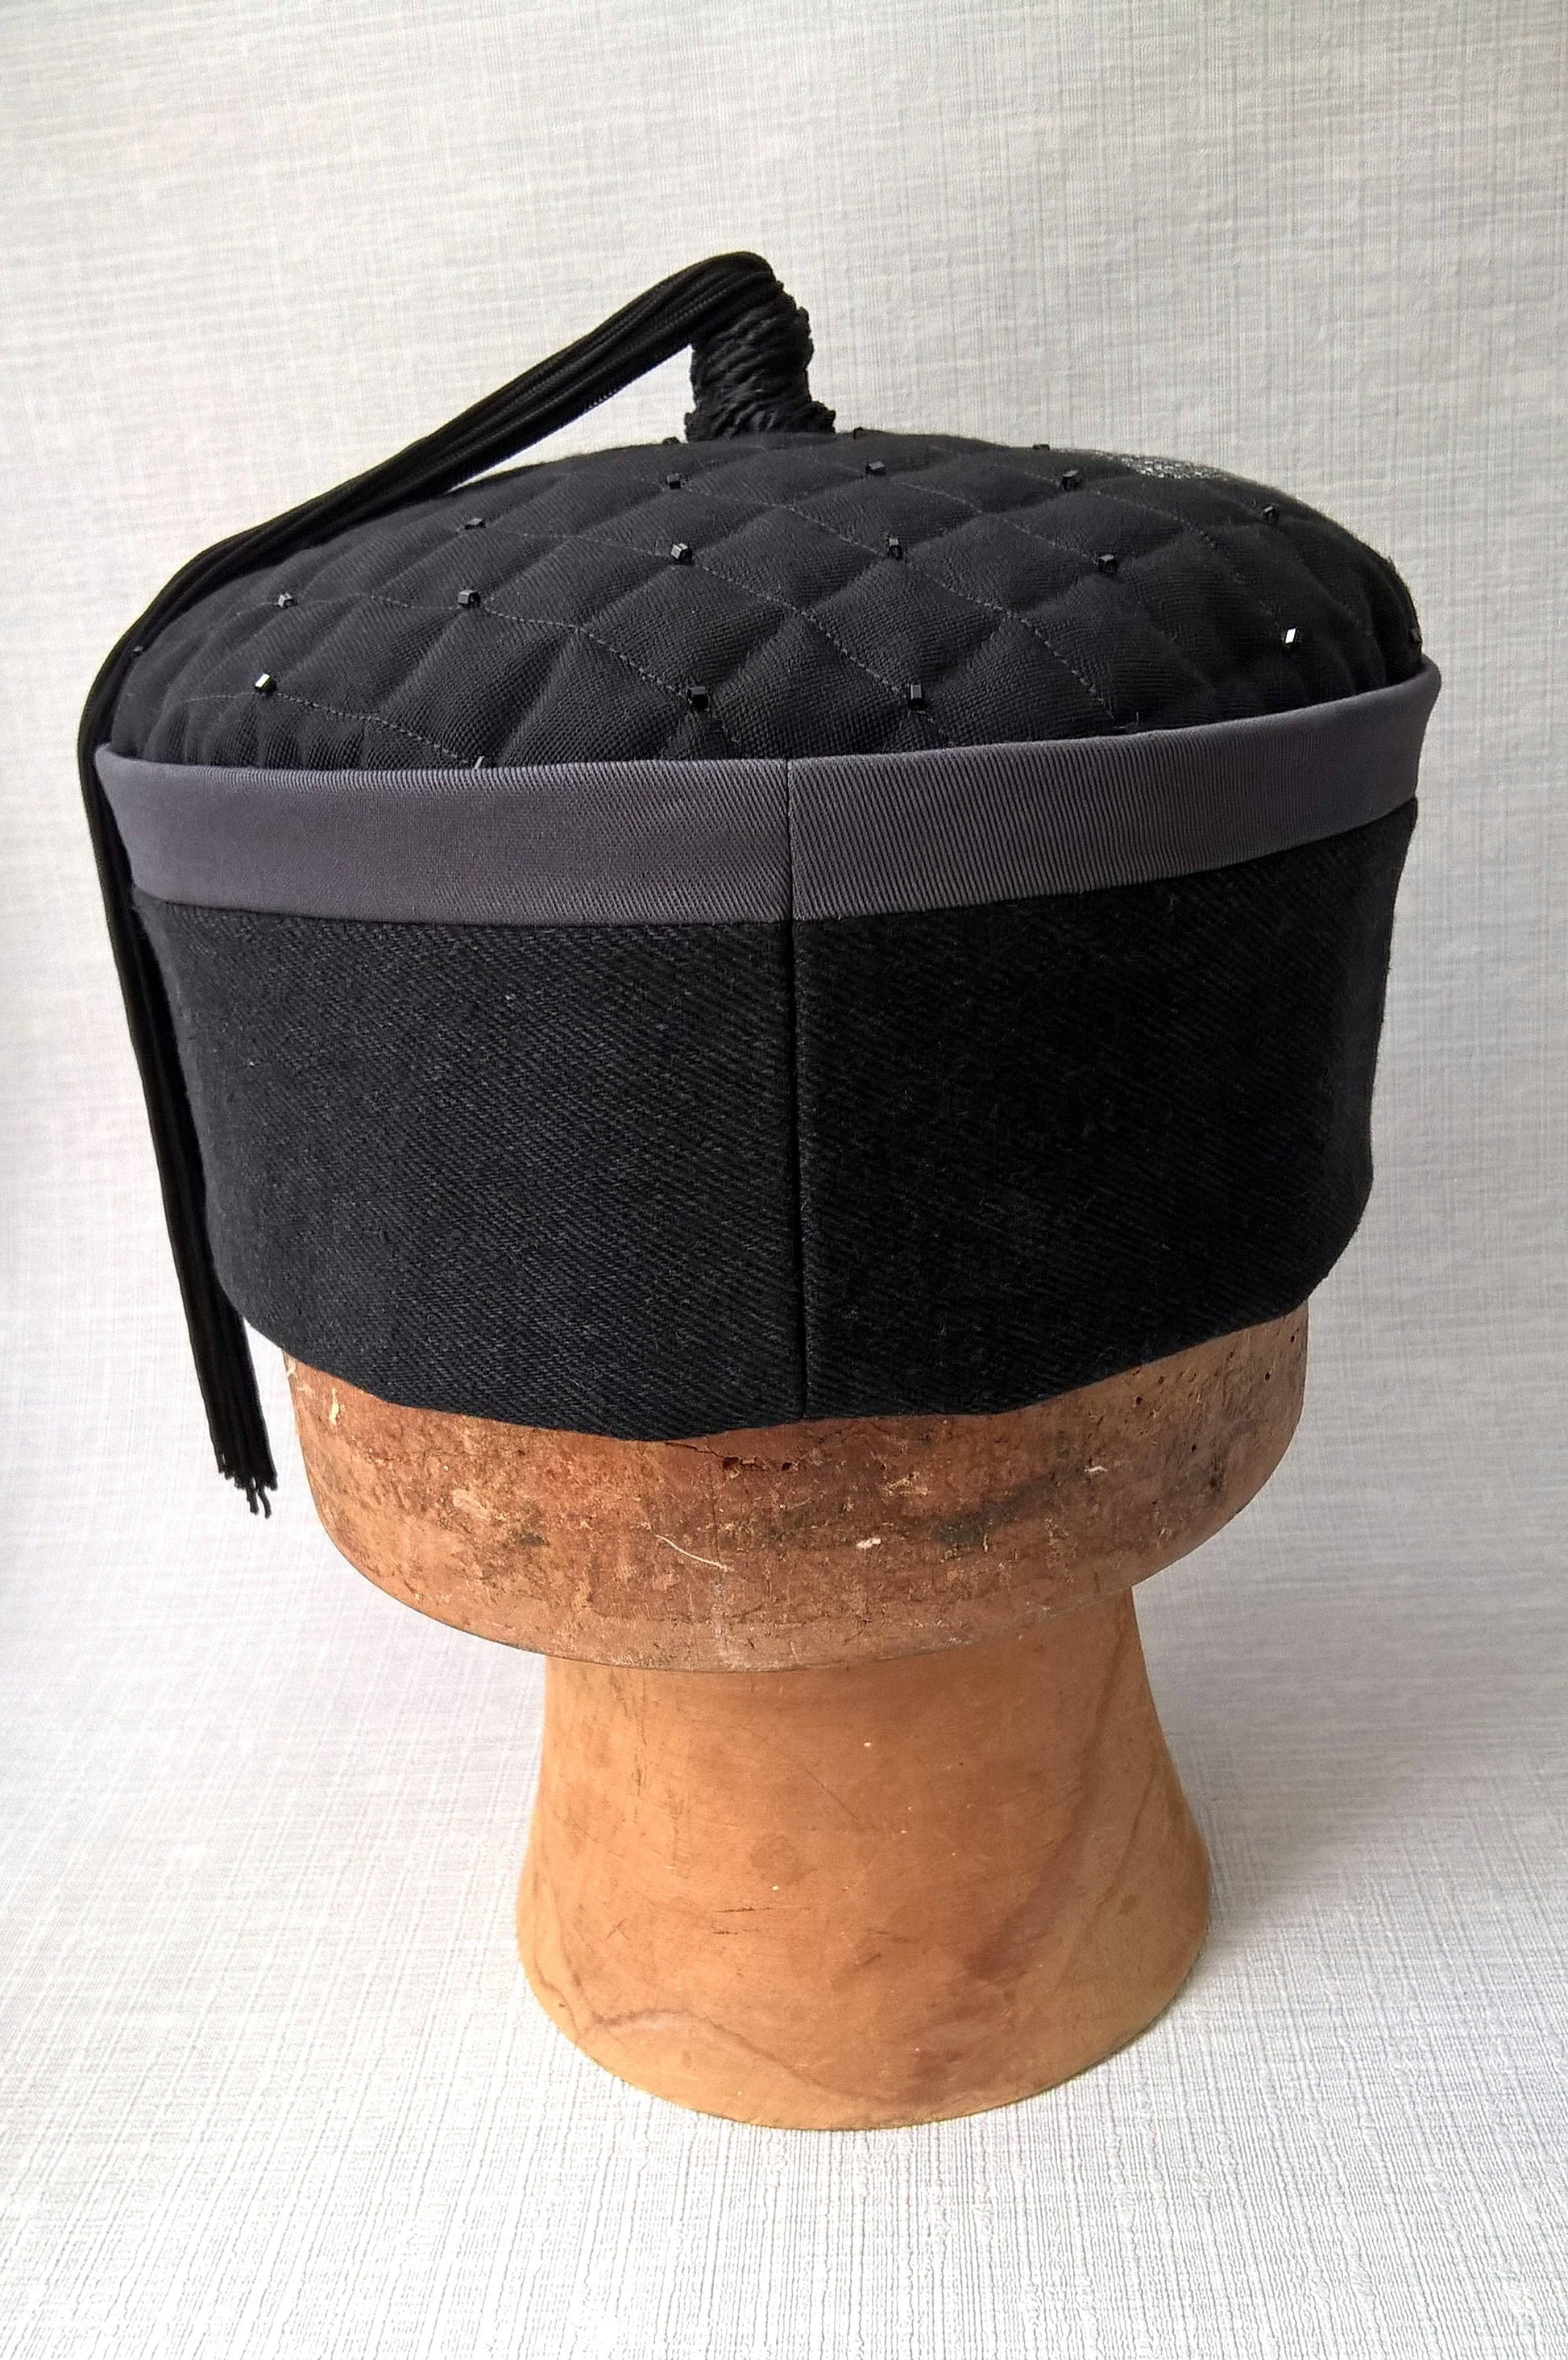 Back view of the wizards tassel smoking cap in black and grey with applique stars